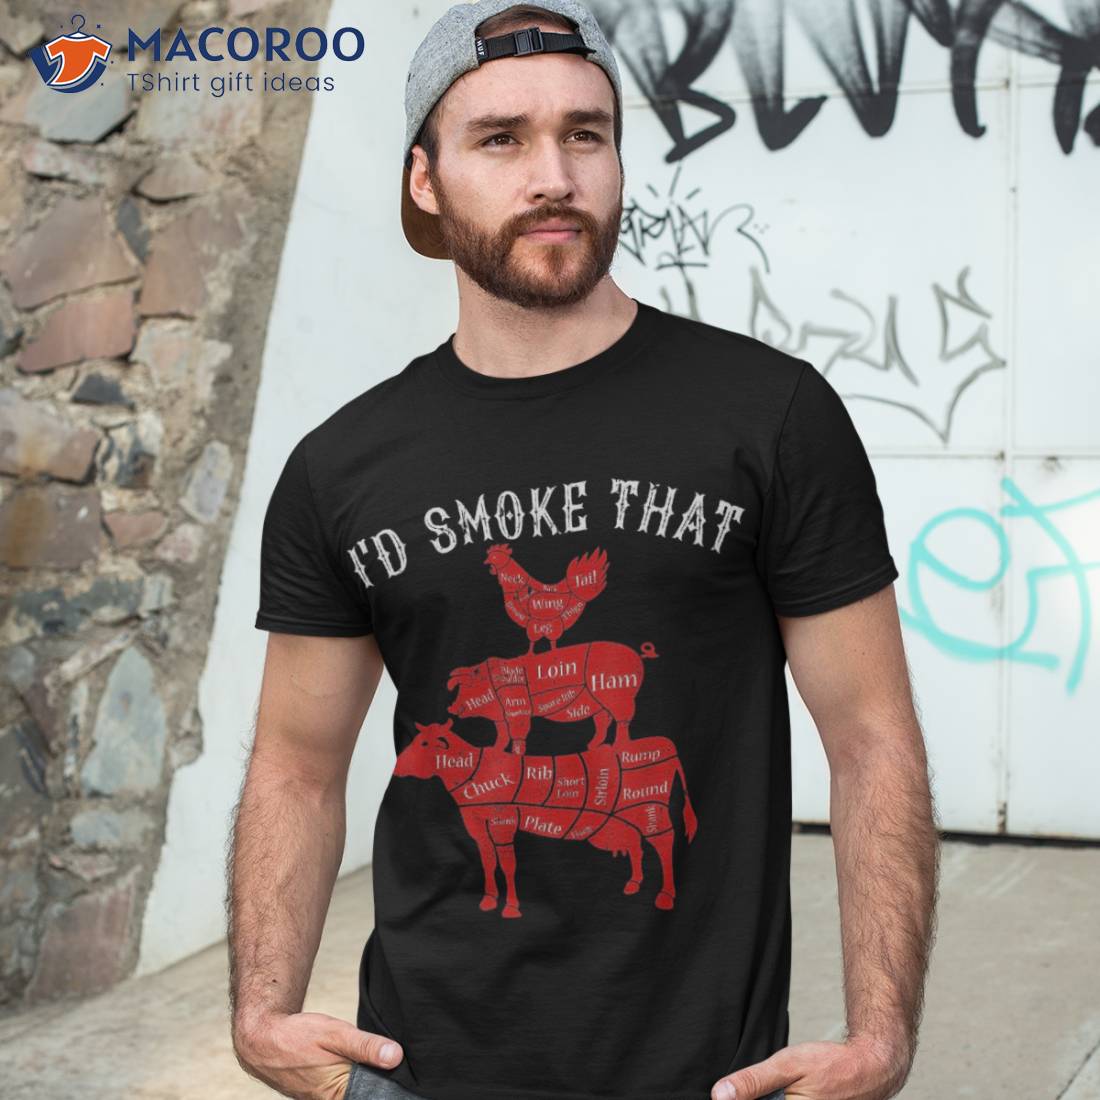 https://images.macoroo.com/wp-content/uploads/2023/06/i-d-smoke-that-barbecue-grilling-bbq-smoker-gift-for-dad-shirt-tshirt-3.jpg